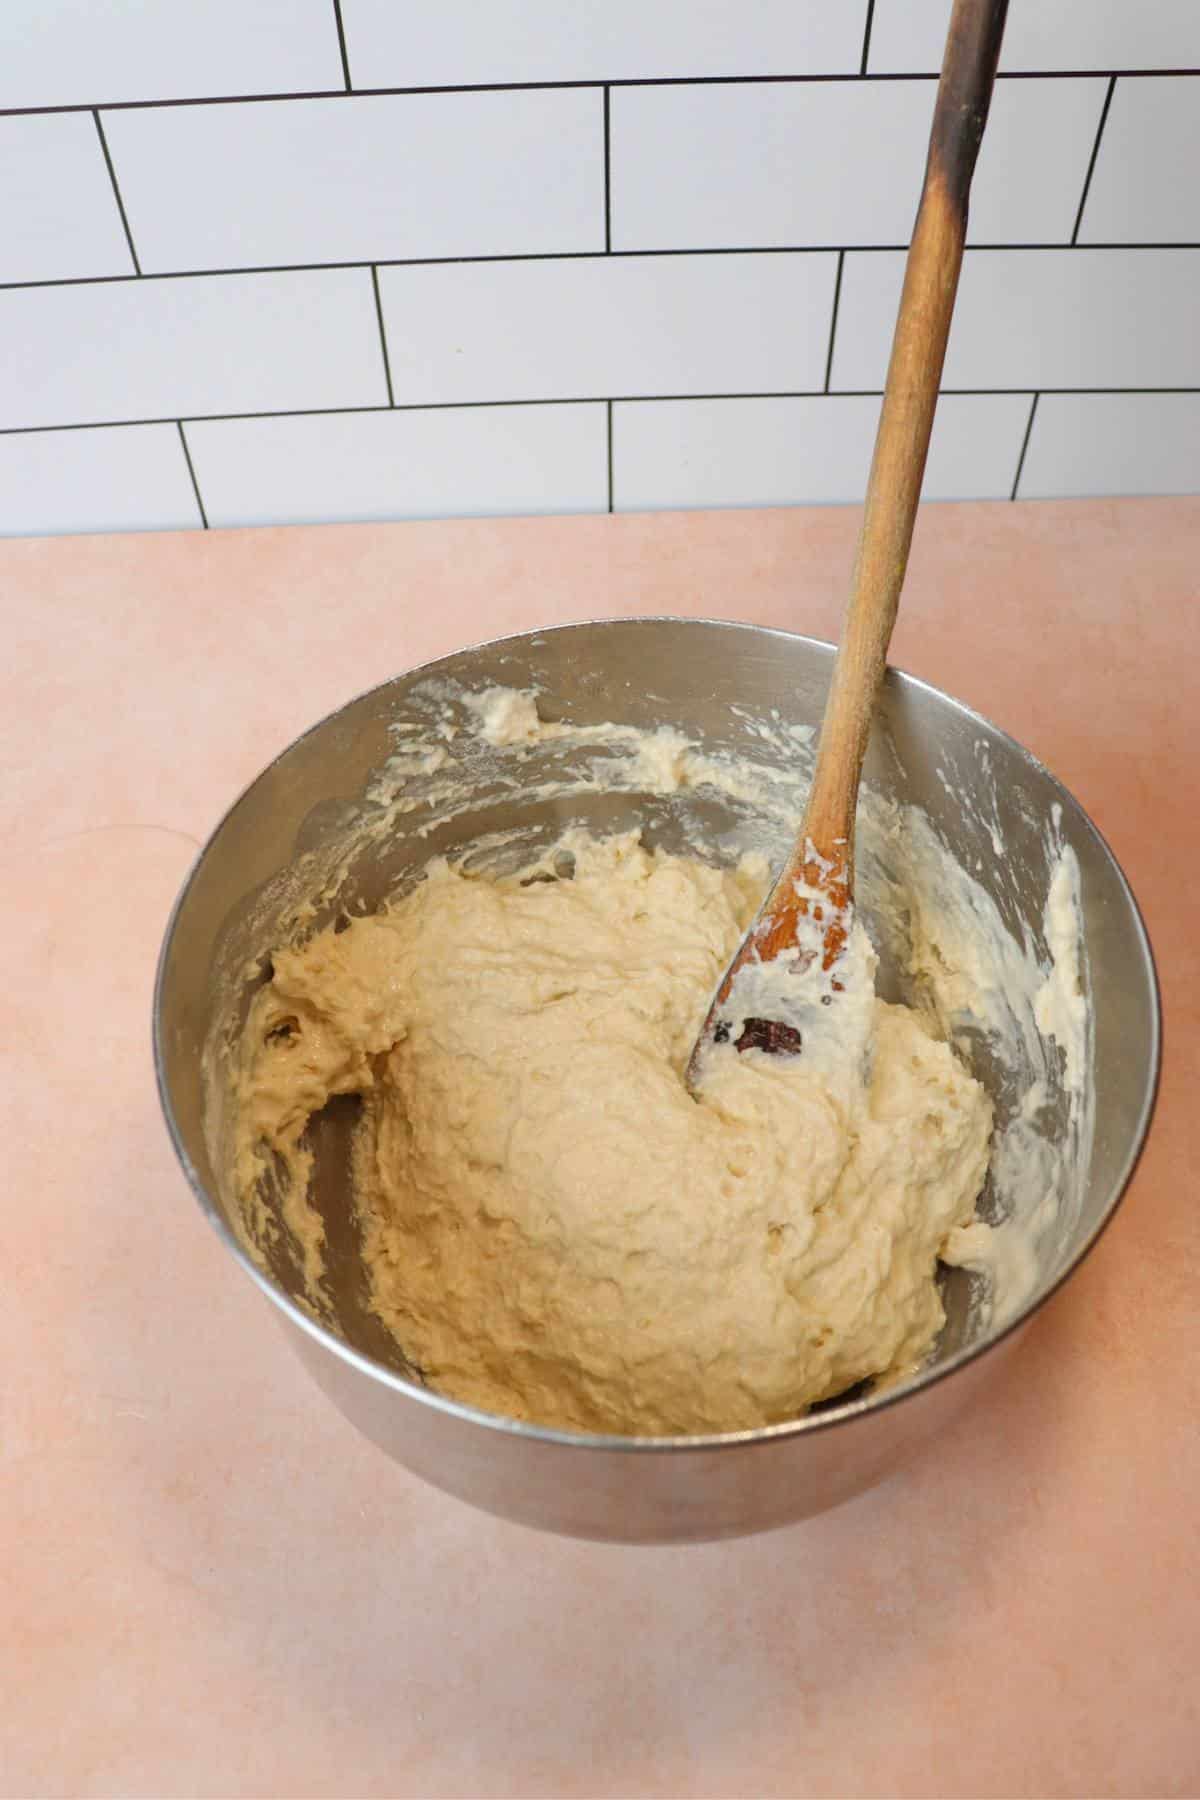 Bread dough in a mixing bowl after adding lukewarm water.